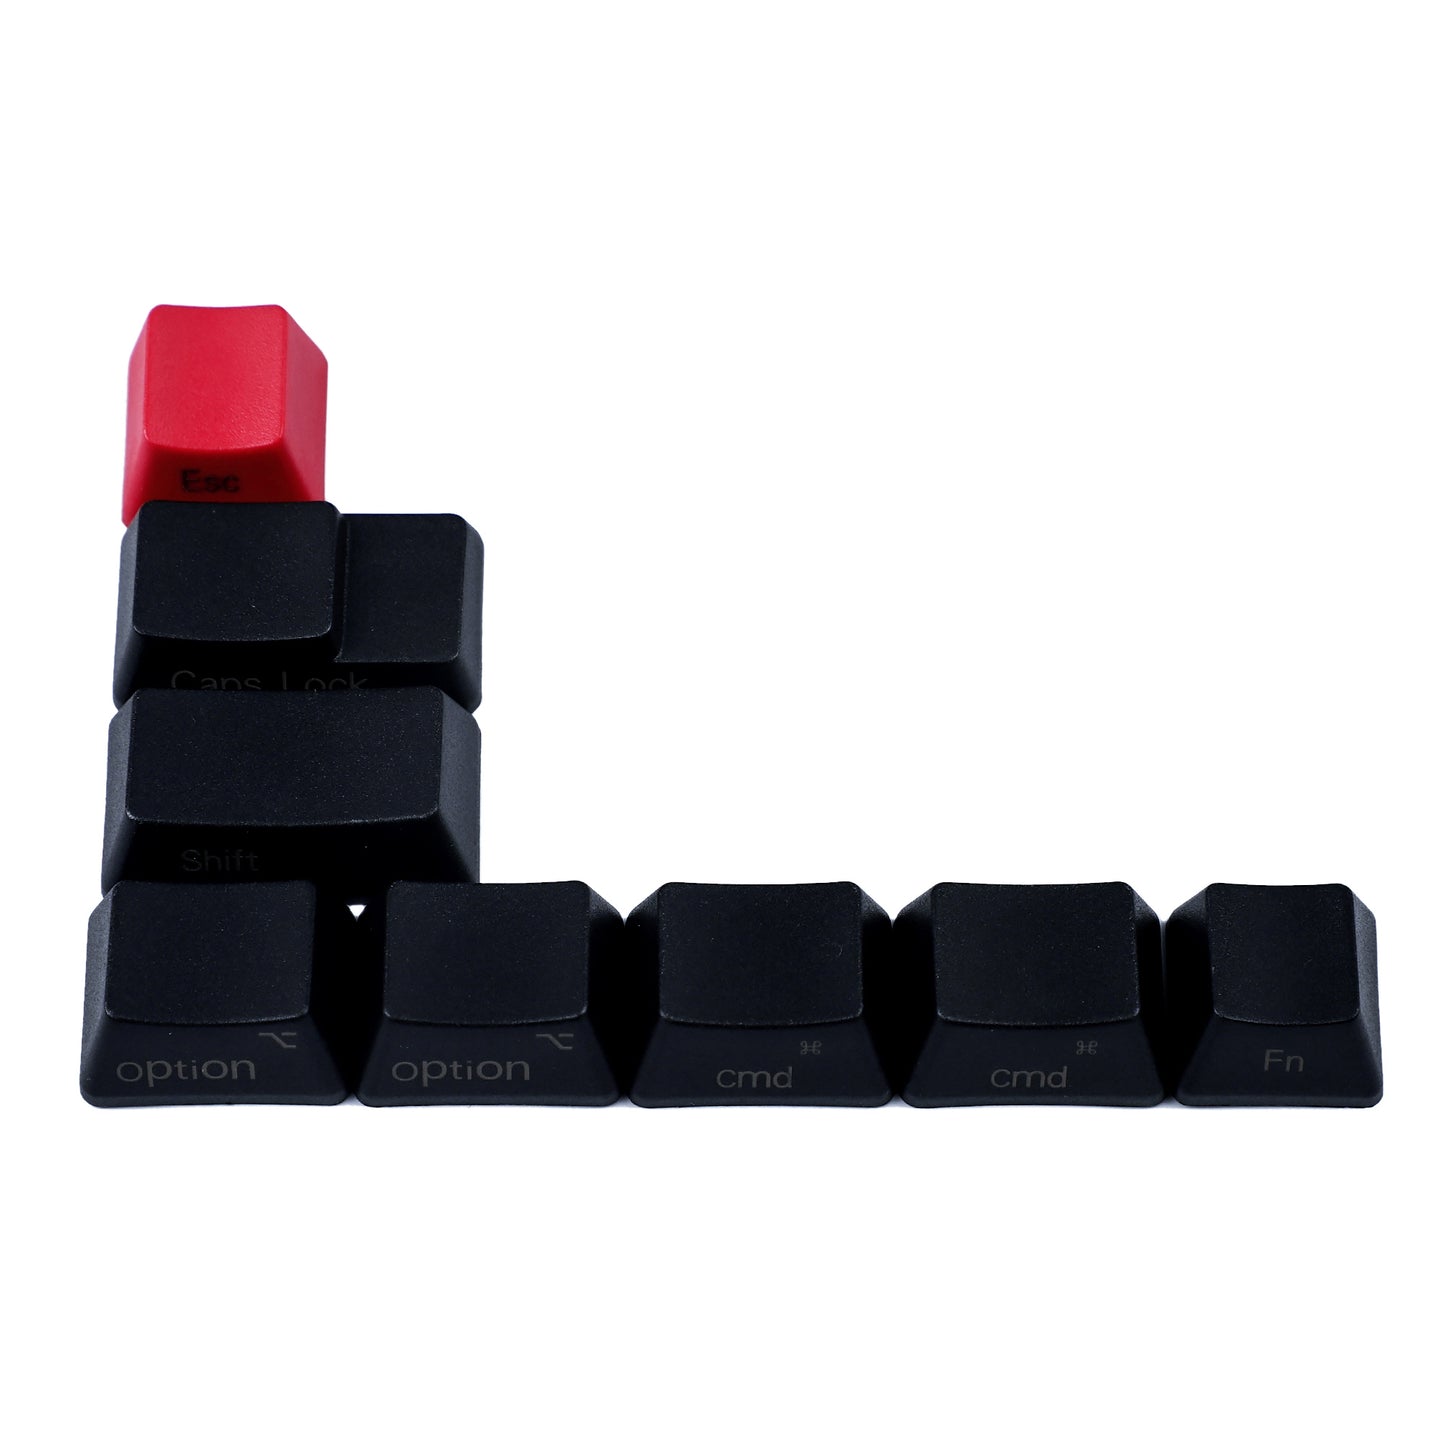 8 Laser-Etched Black Red Mac Keycaps(OEM Profile PBT 1.5mm Thickness/Dolch Using)